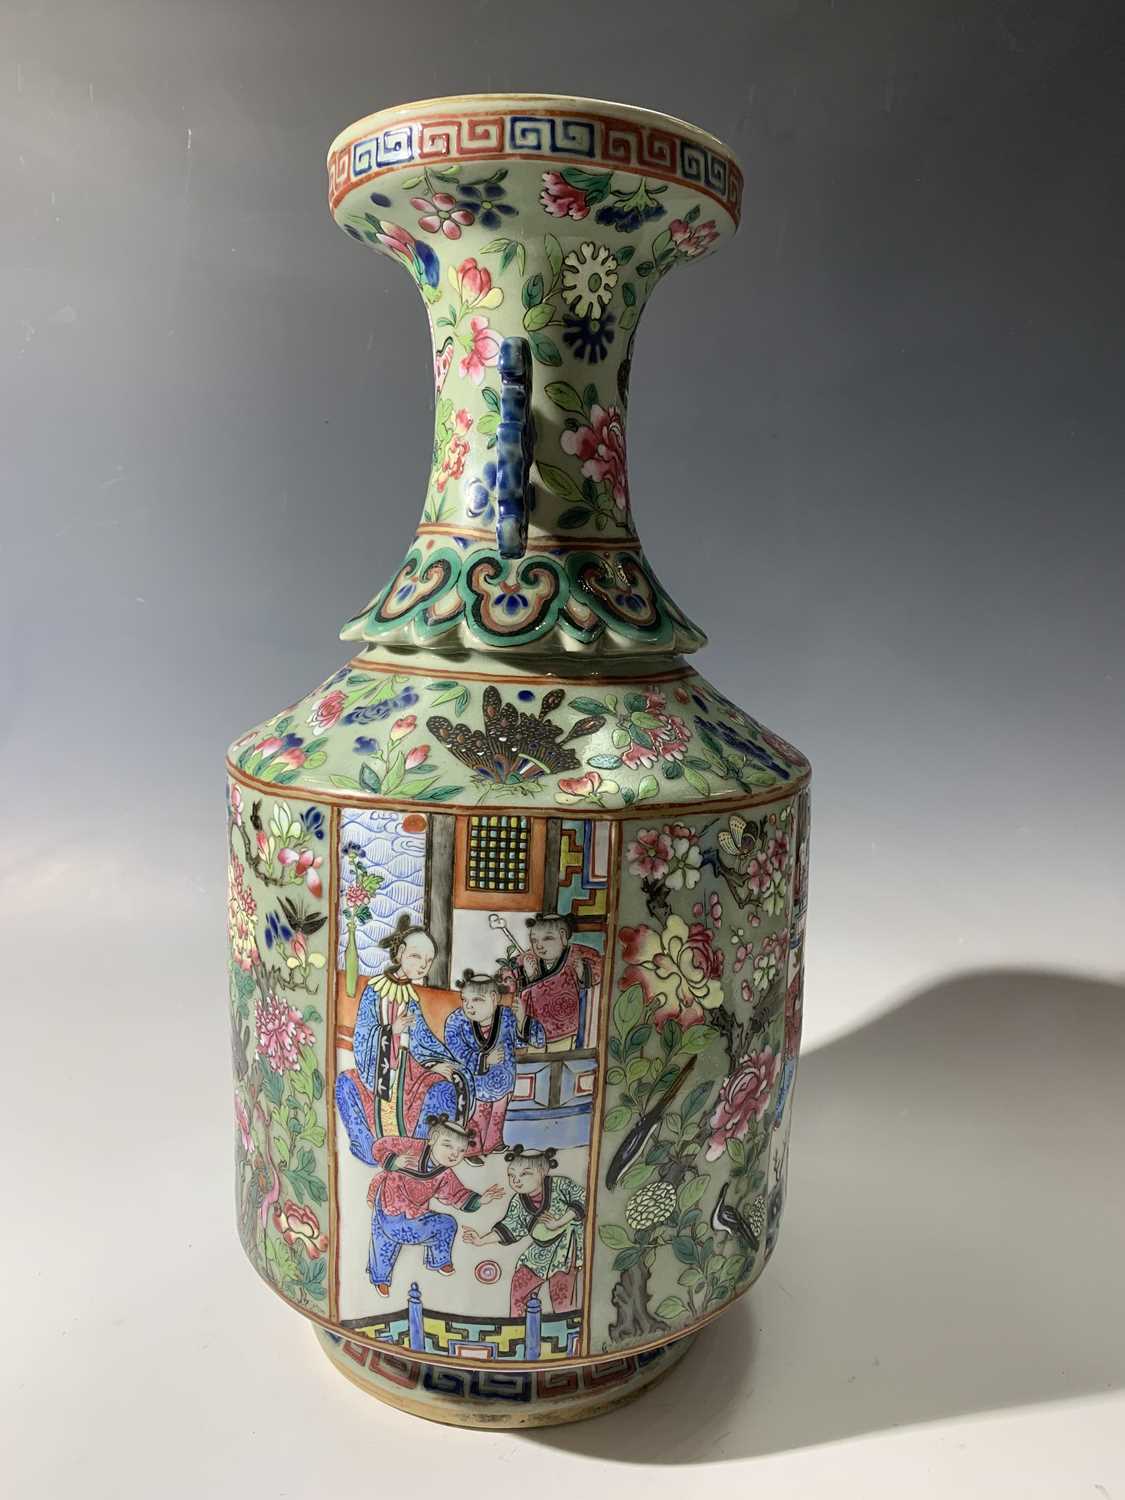 A Chinese Canton twin-handled celadon vase, 19th century, with butterflies amongst foliage above - Image 27 of 27